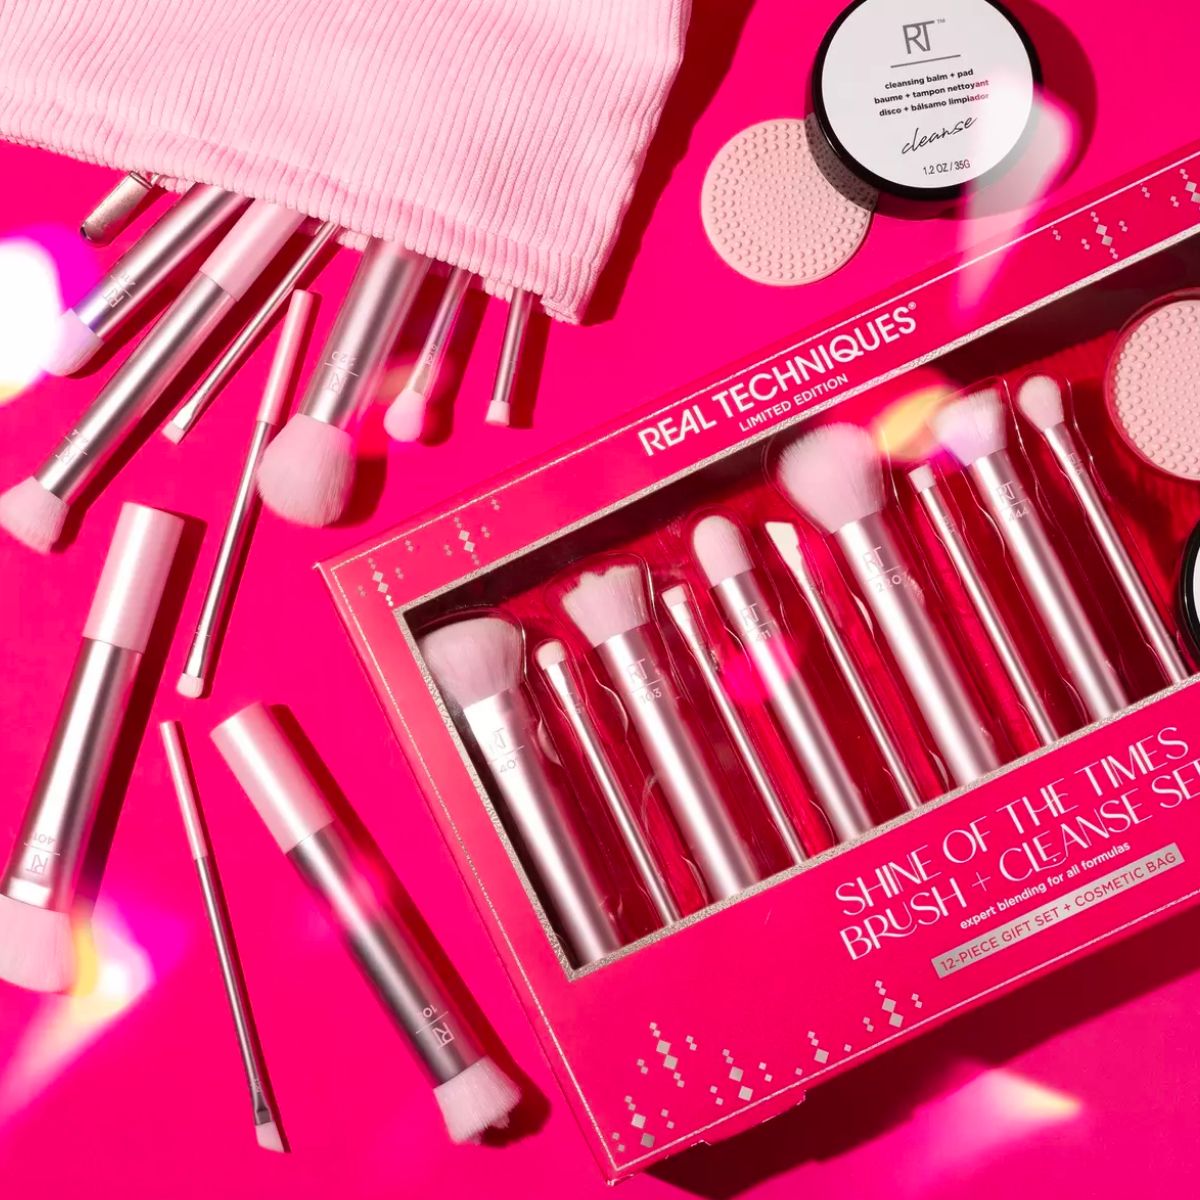 Real Techniques Shine of The Times 12-Piece Makeup Brush + Cleanse Gift Set displayed on a hot pink background